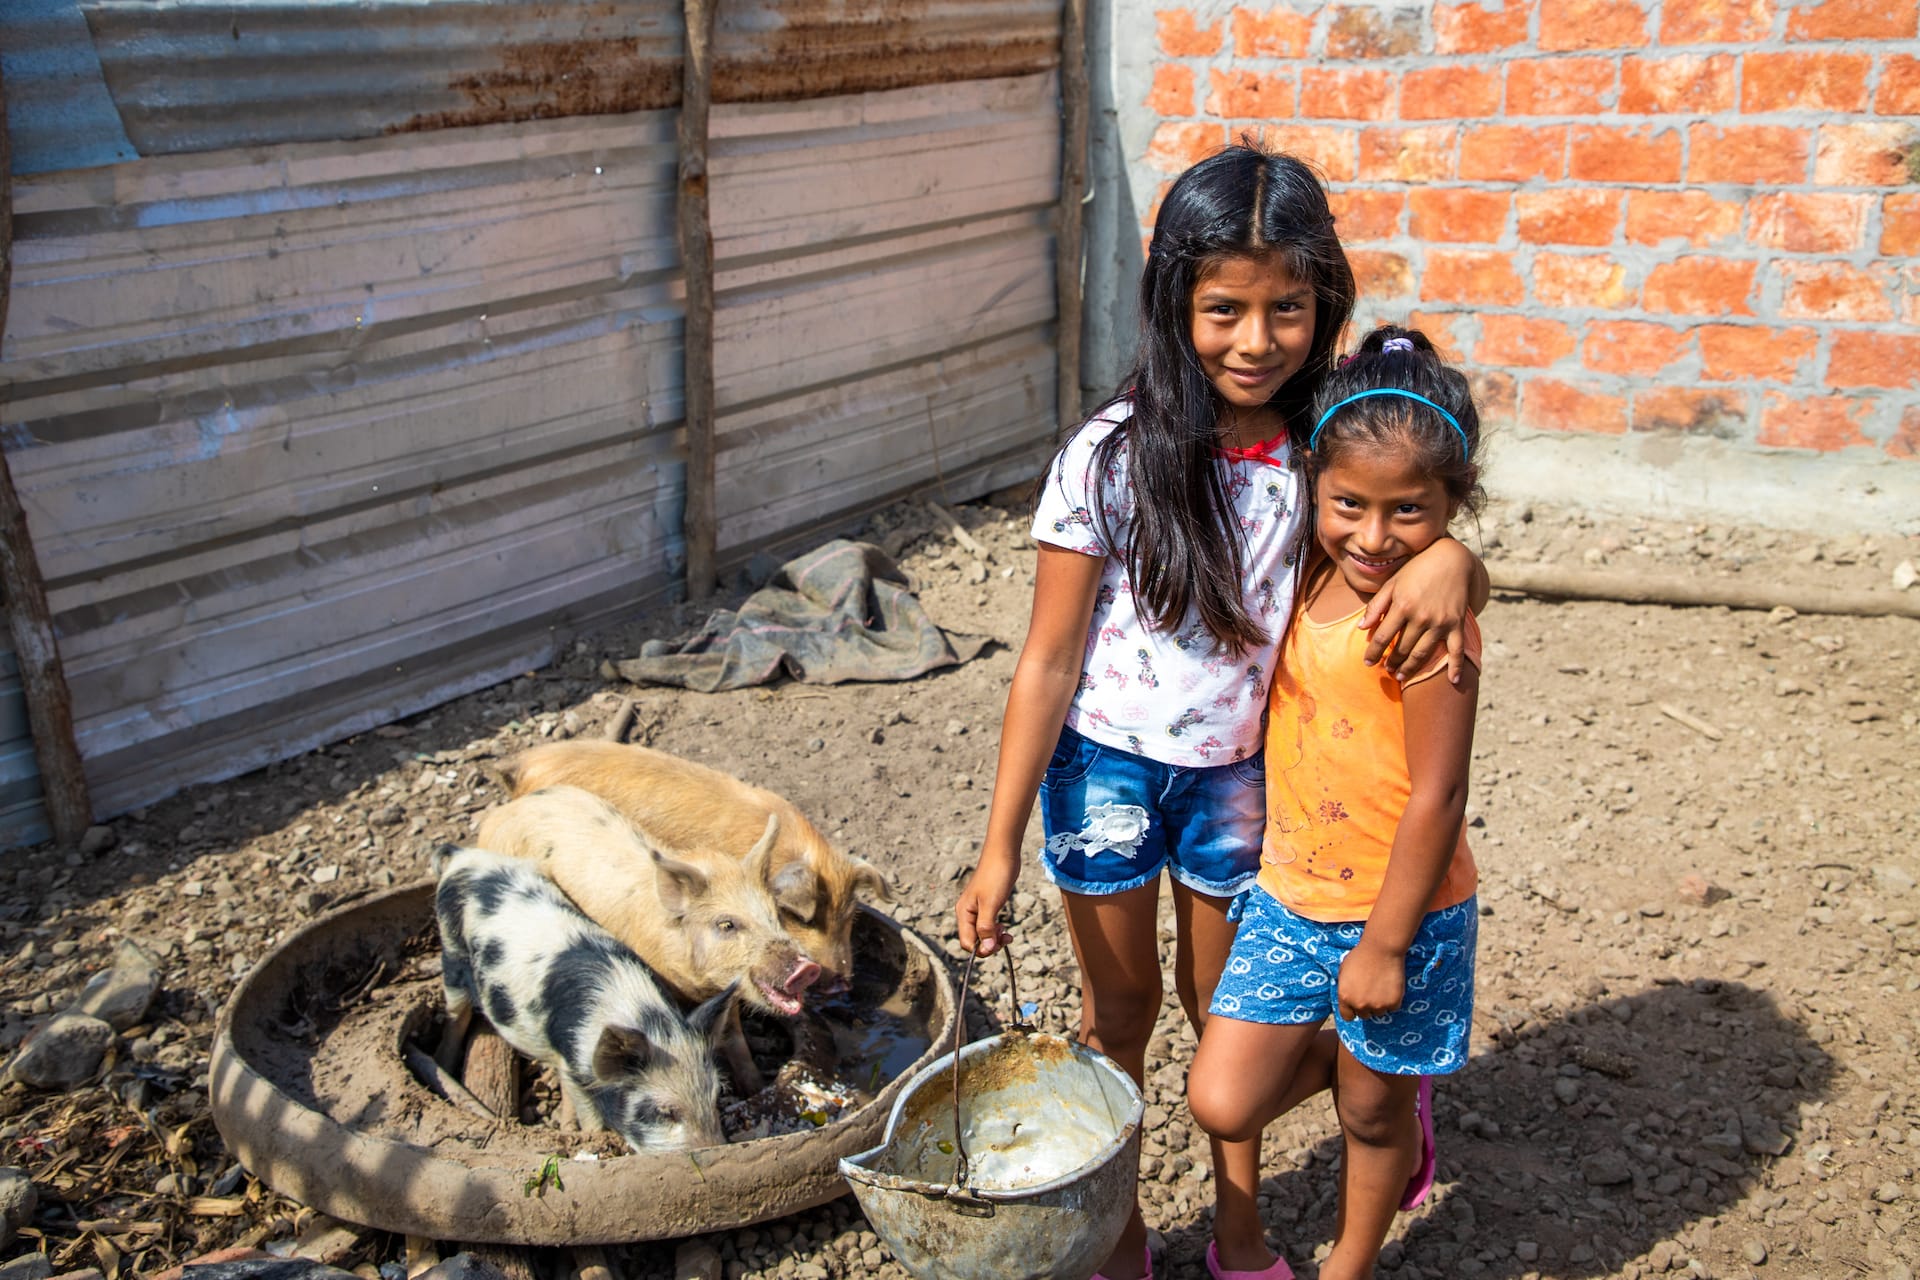 Two little girls are pictured smiling beside 3 pigs.